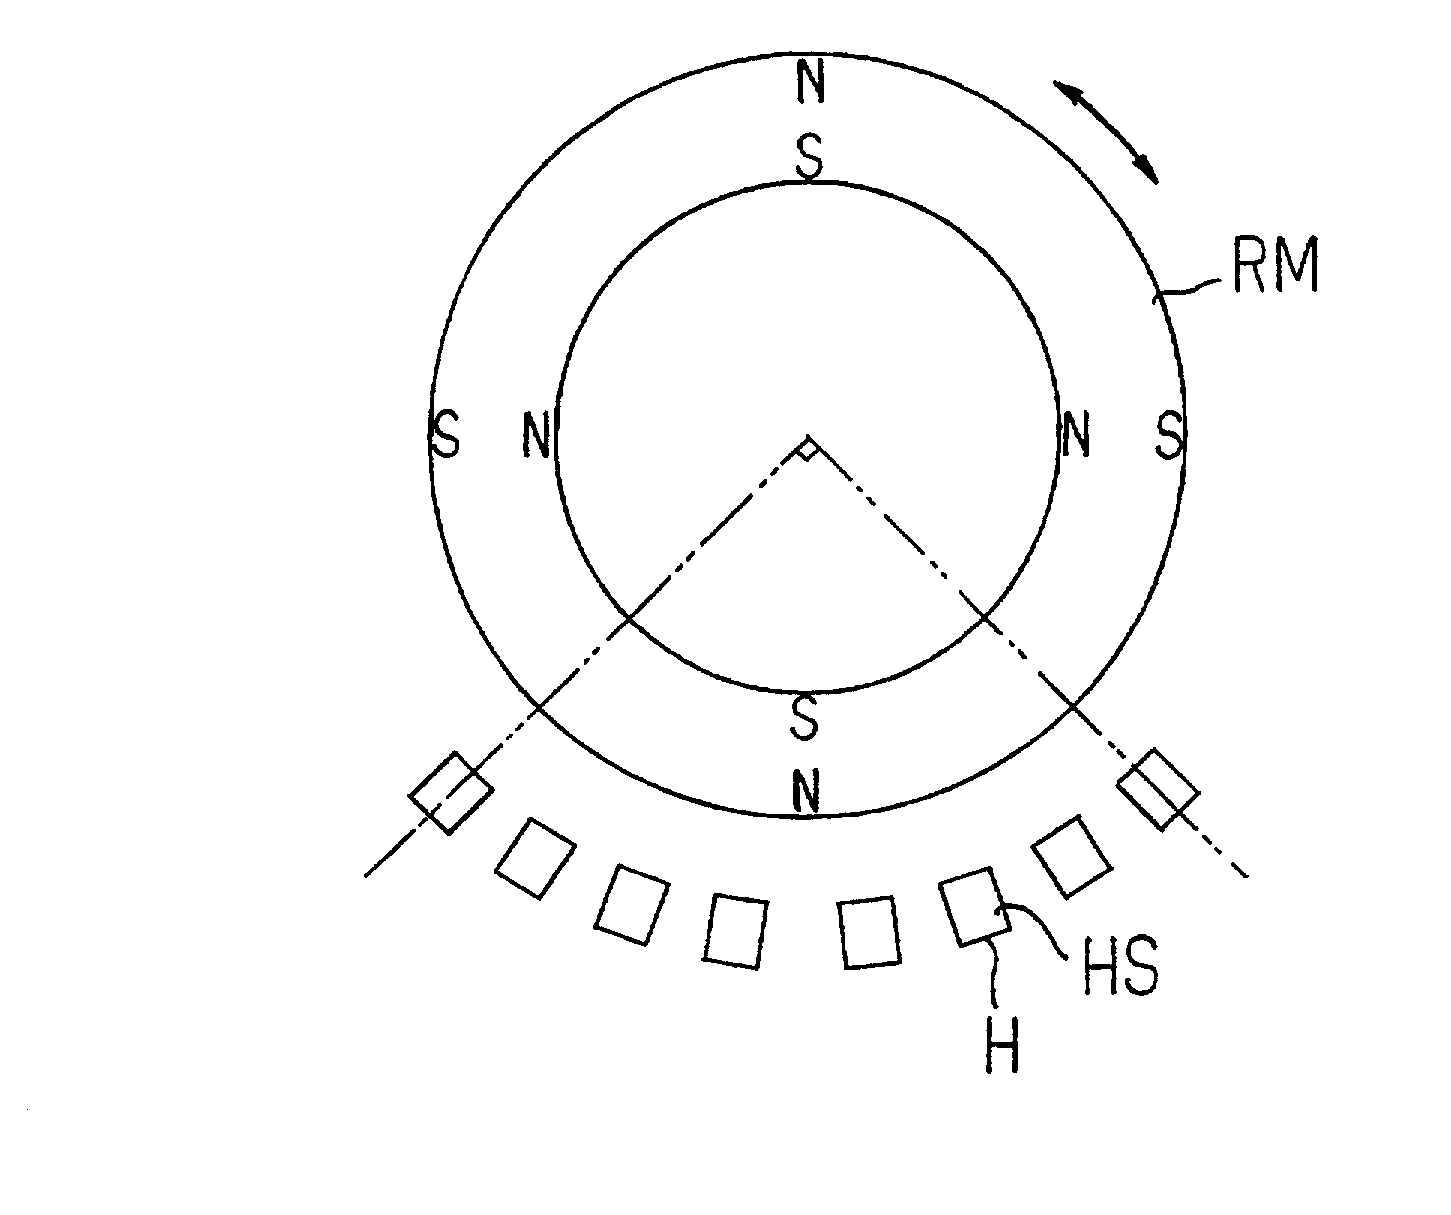 Apparatus and method for detecting the displacement